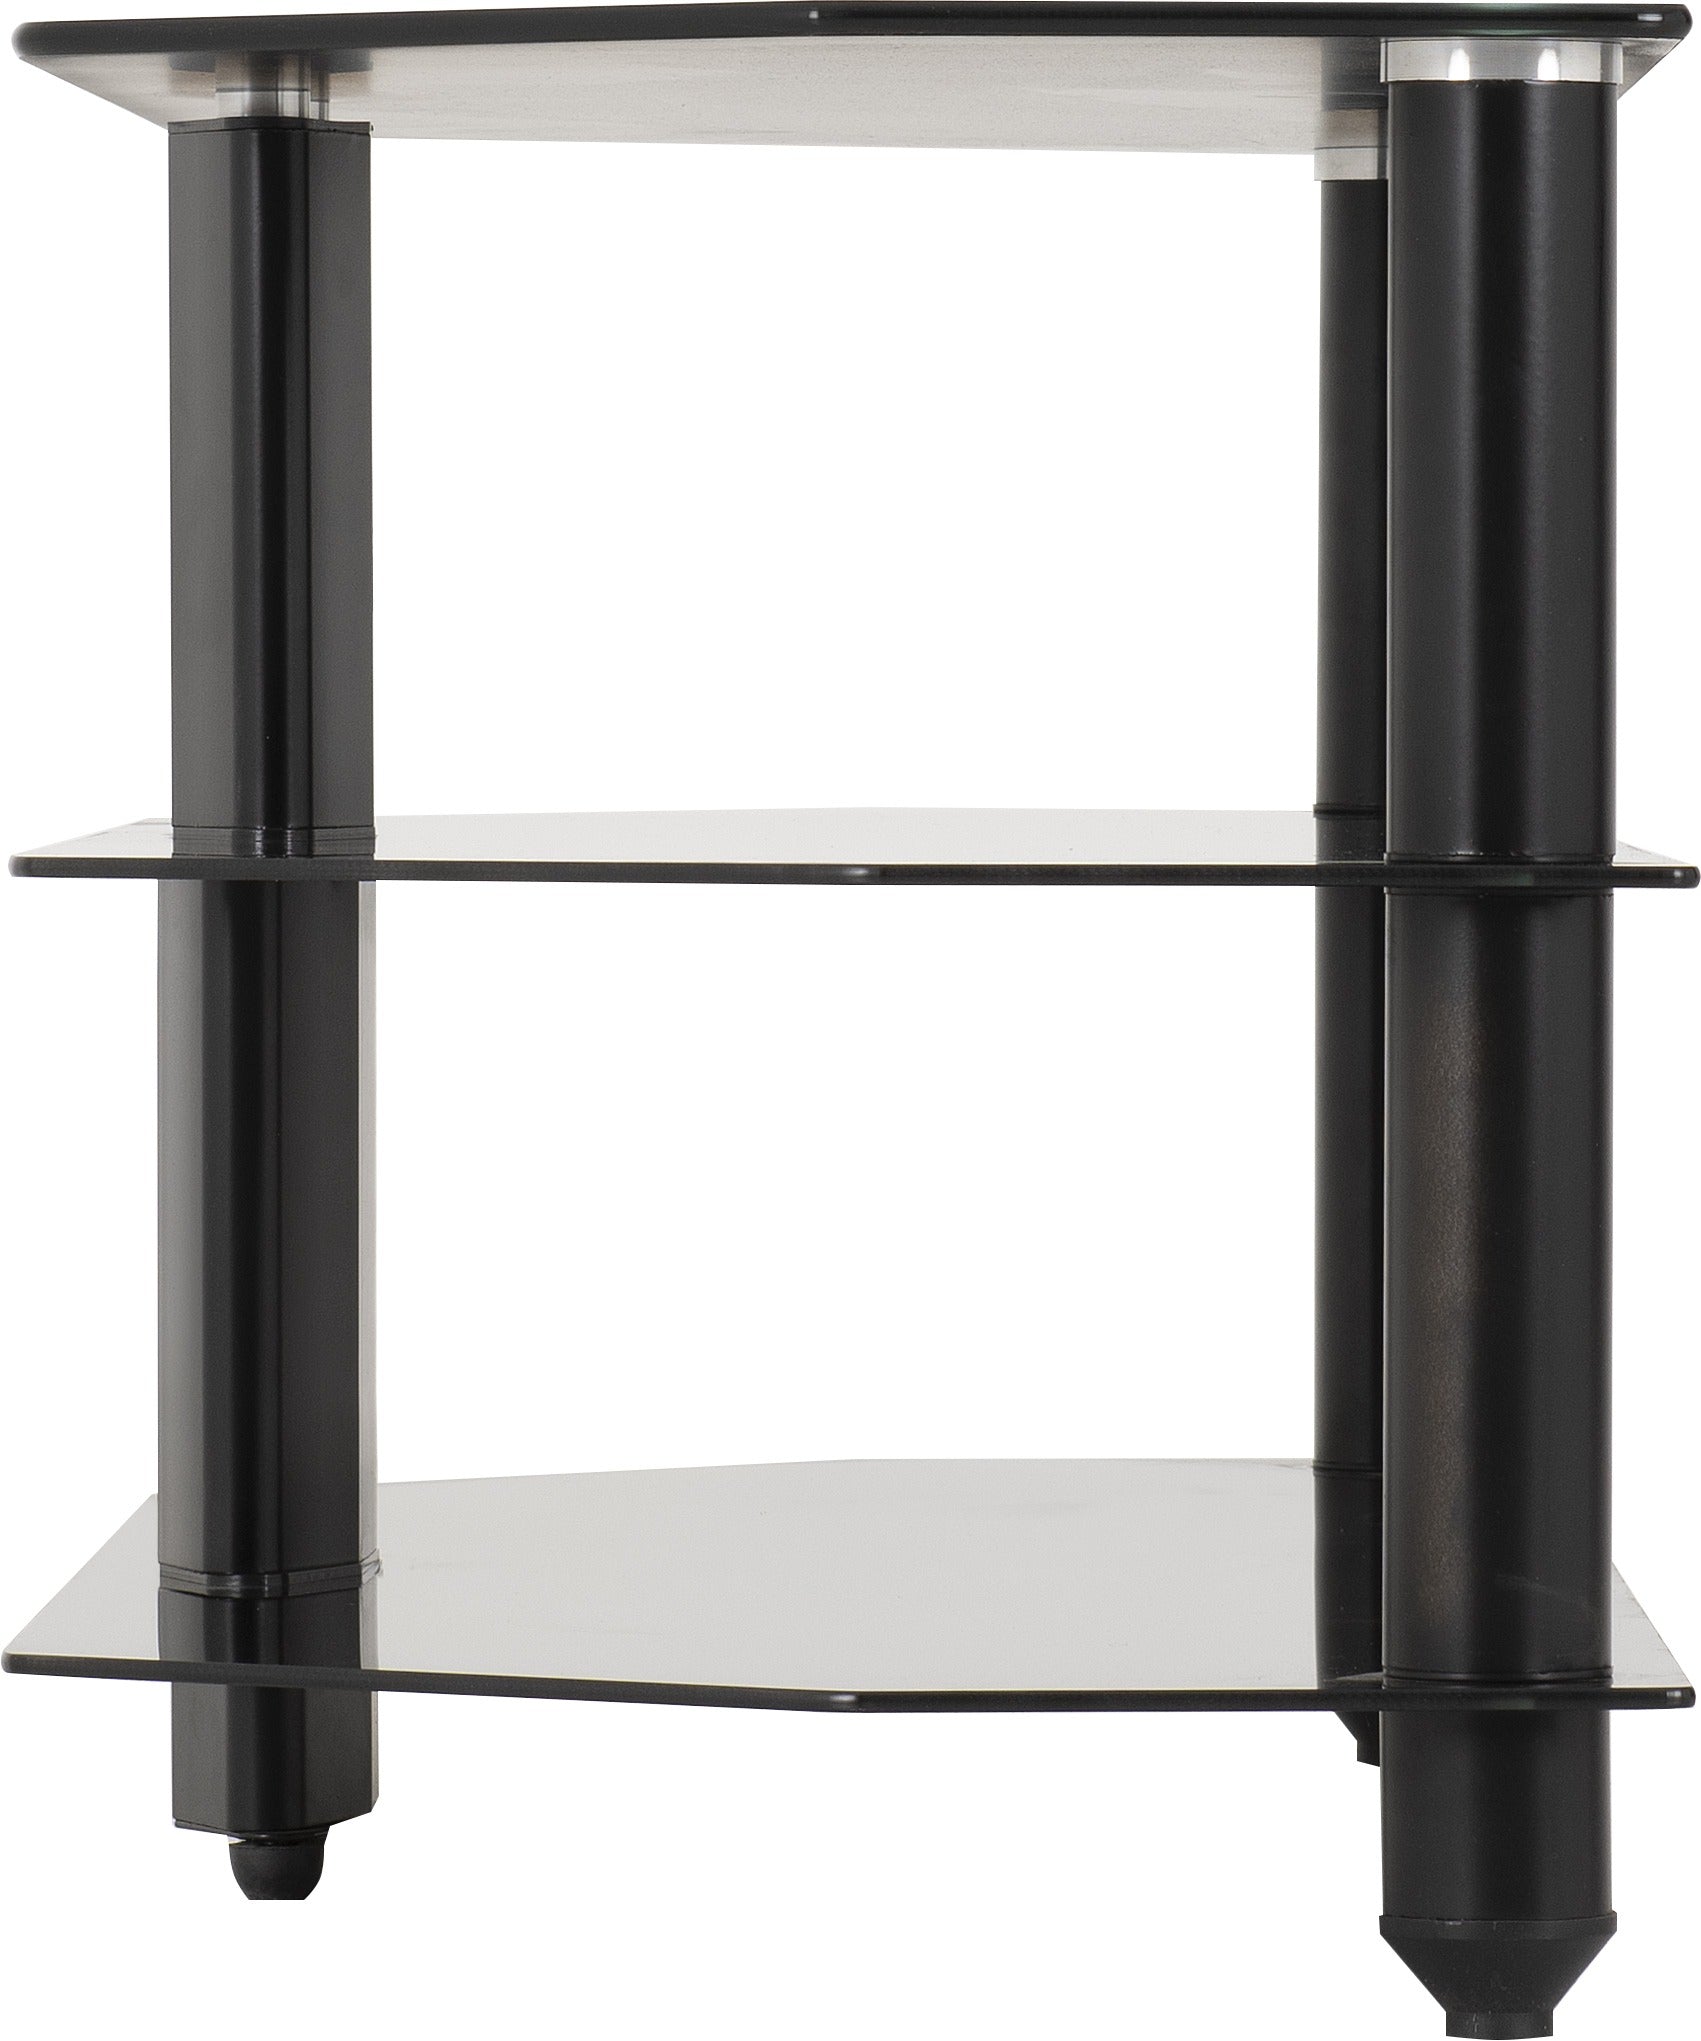 Bromley TV Stand Black Glass/Black- The Right Buy Store